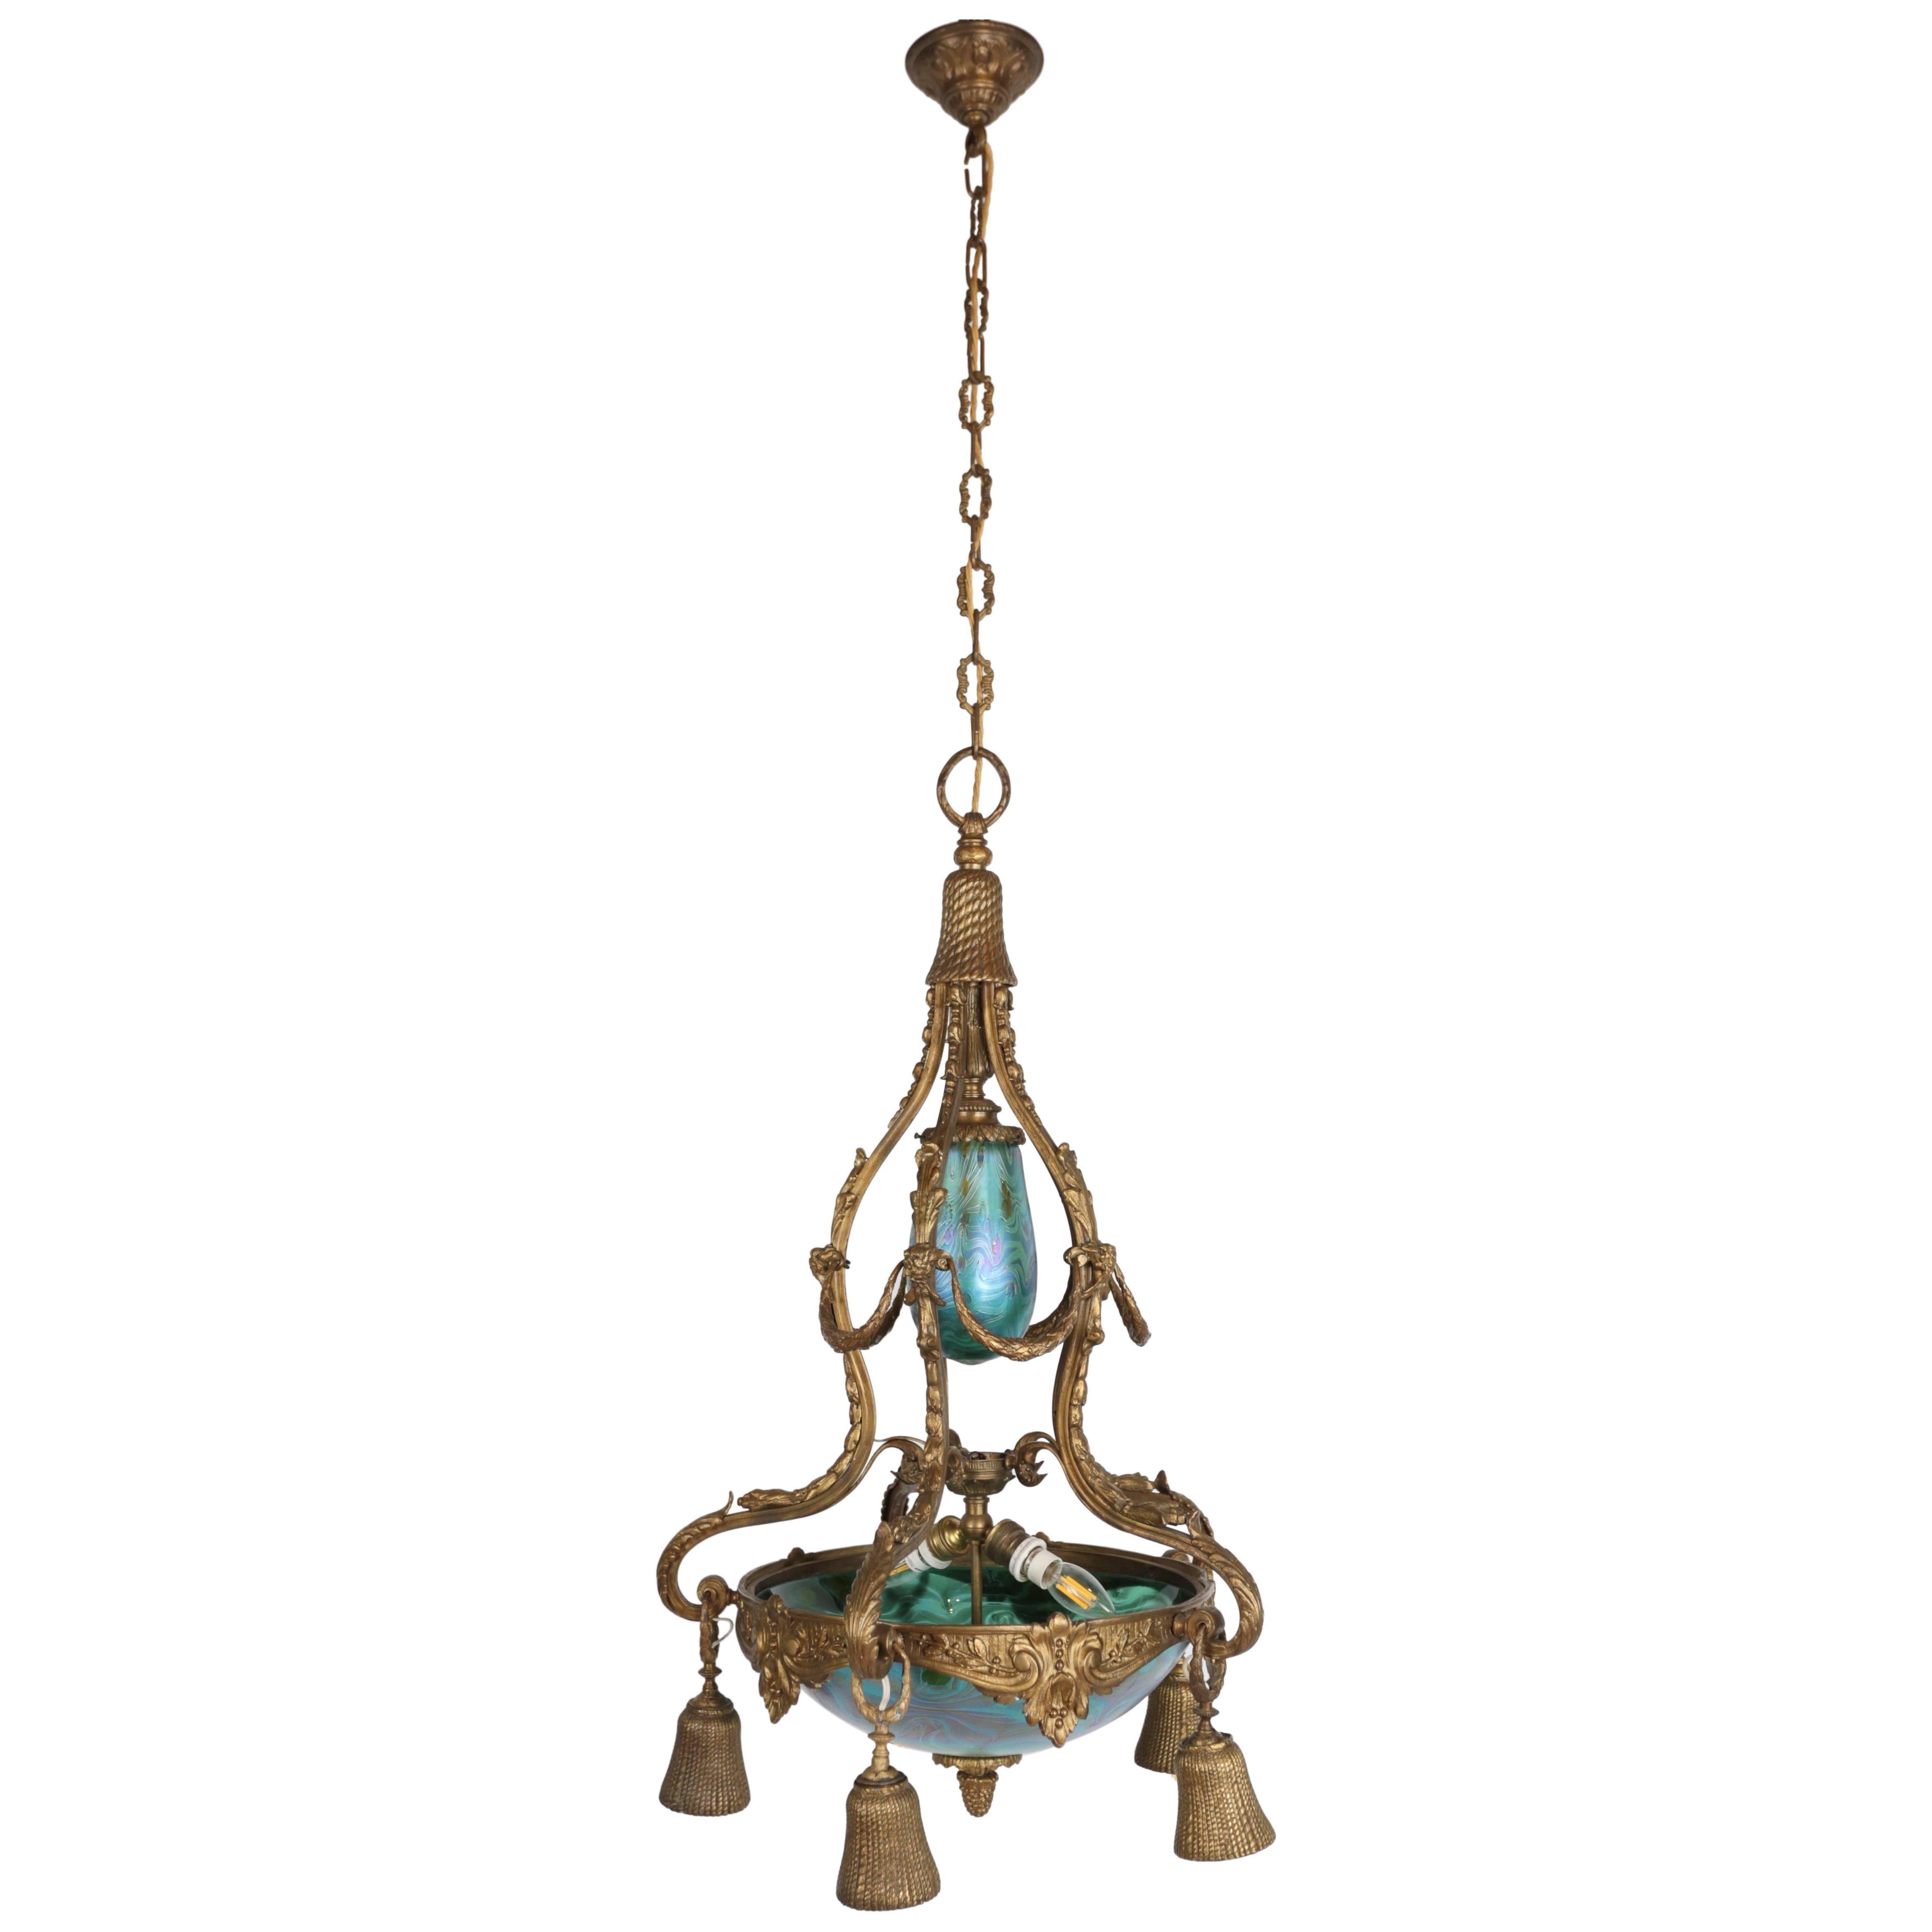 Art Nouveau bronze chandelier with iridescent glass shades For Sale